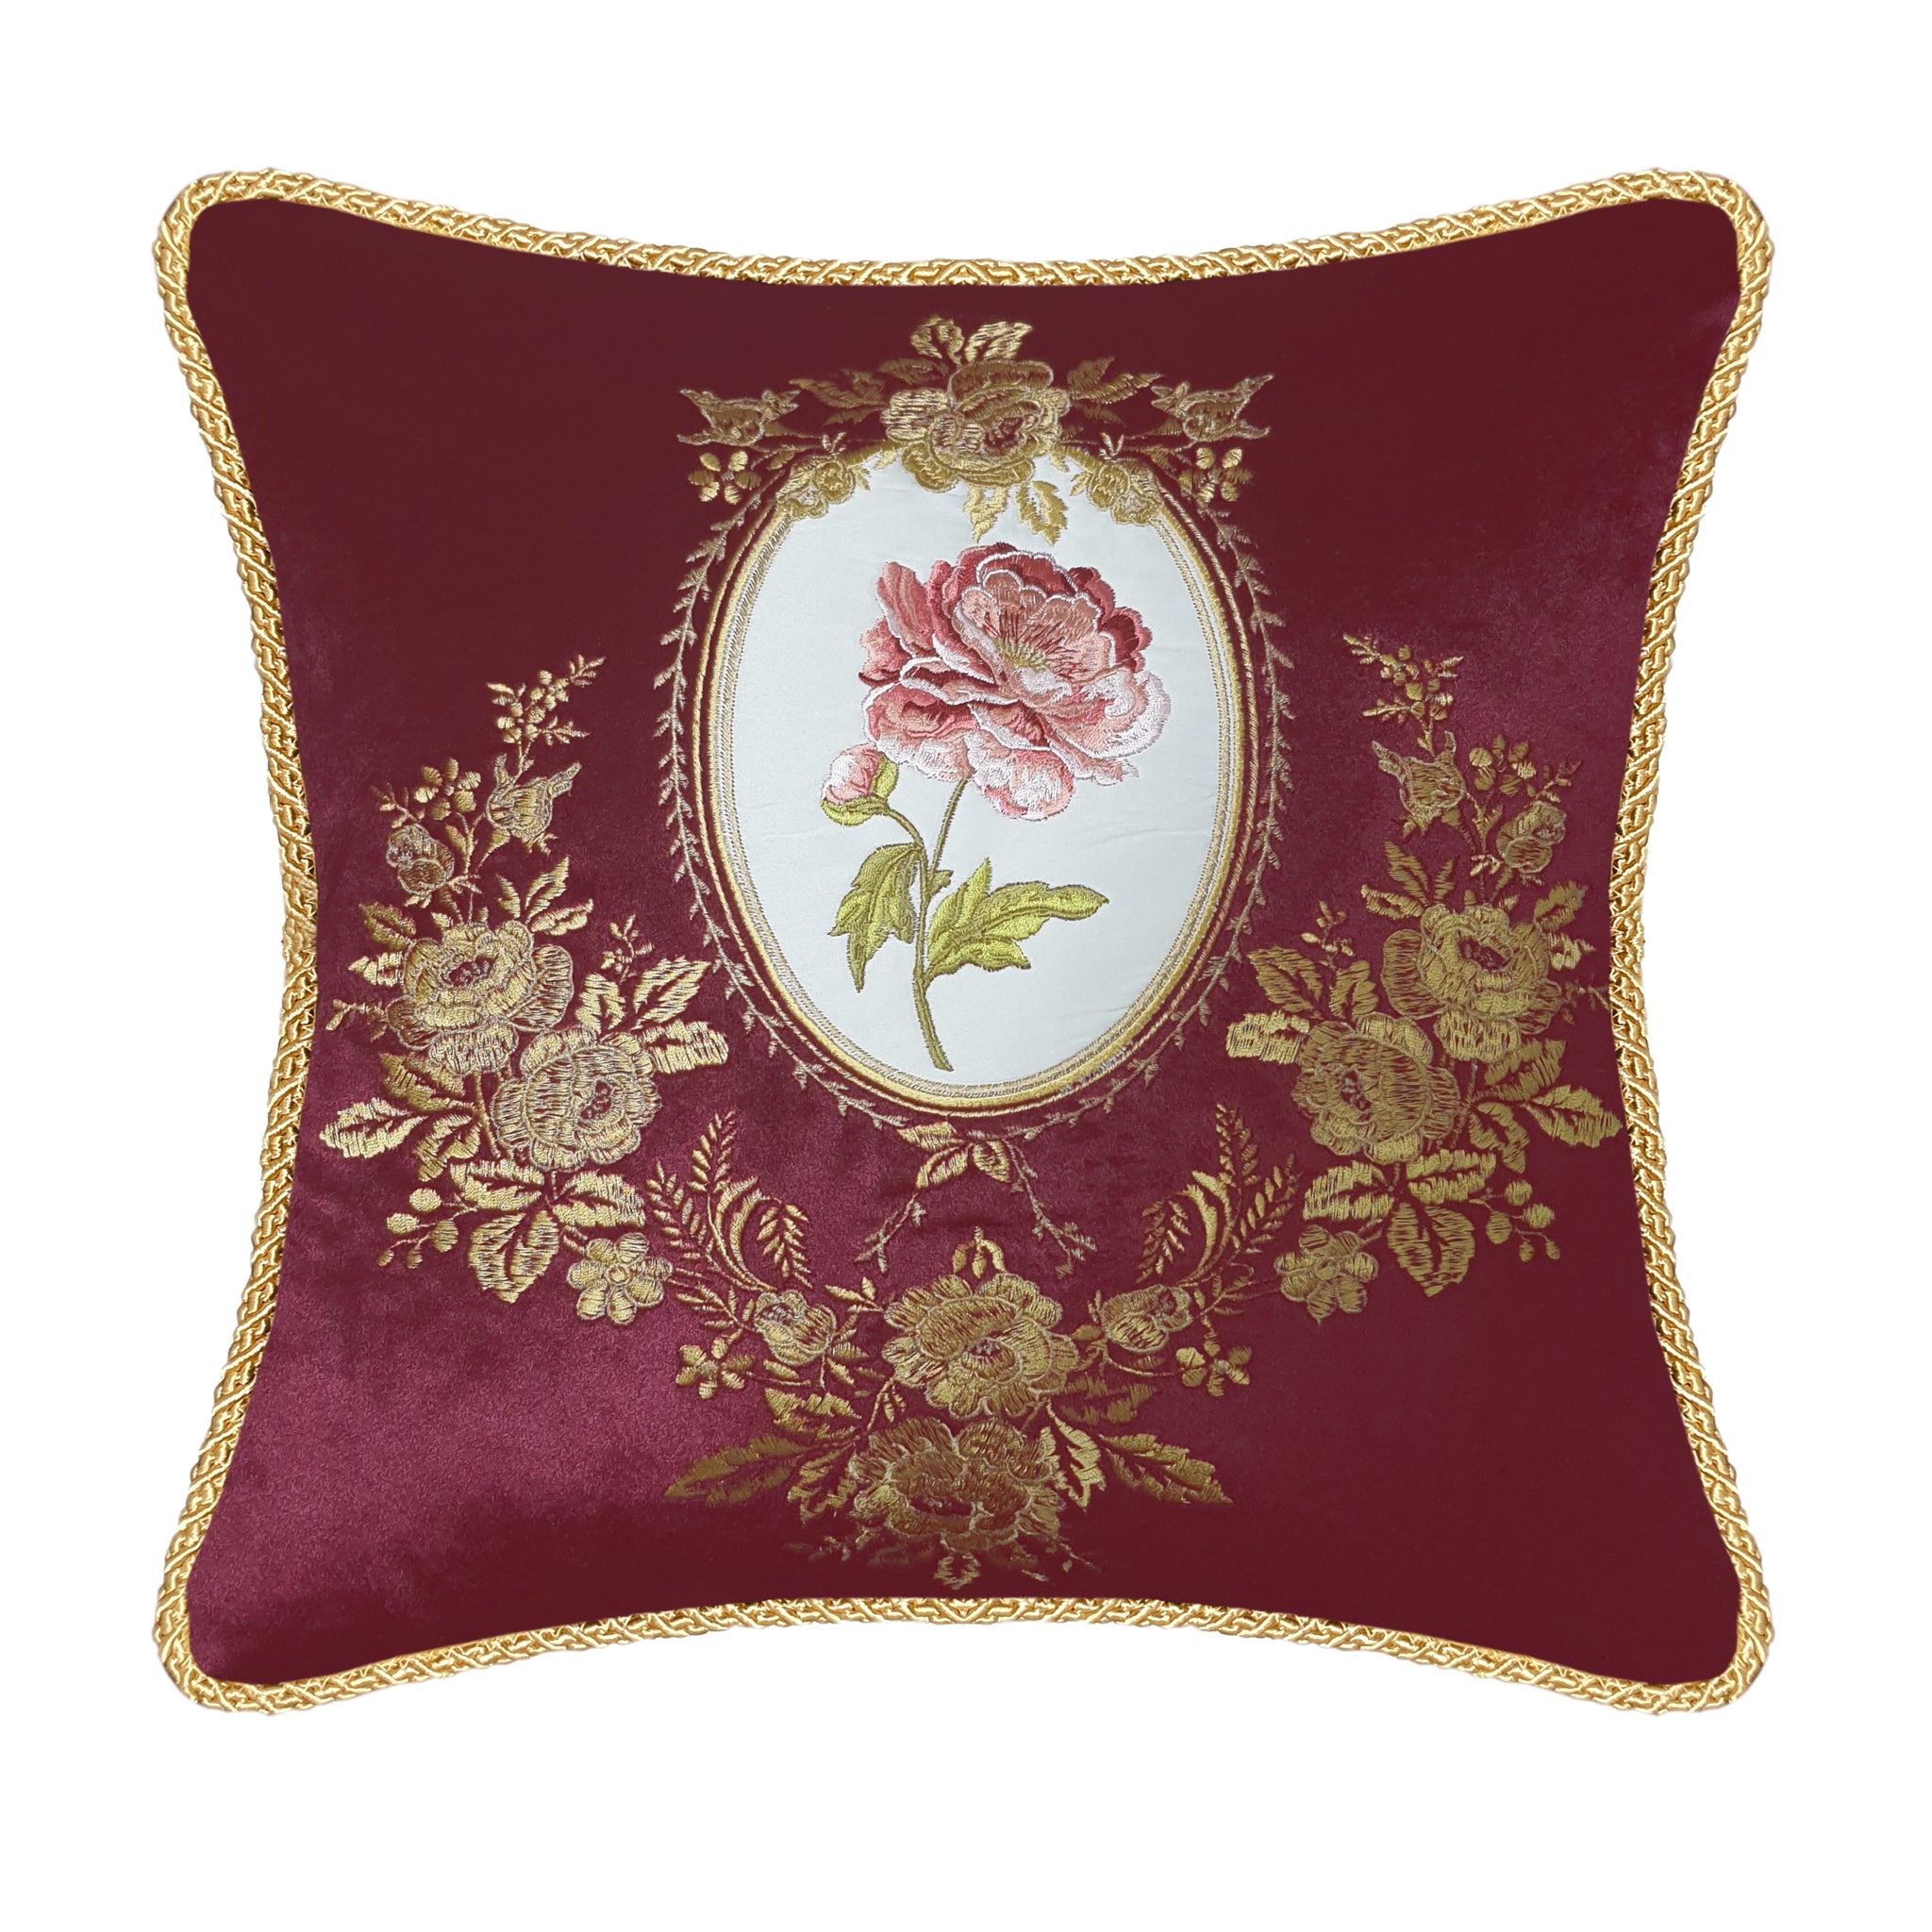  Velvet Cushion Cover Victorian Rose Decorative Pillowcase Classic Floral Embroidery Throw Pillow for Sofa Chair Living Room 45x45 cm 